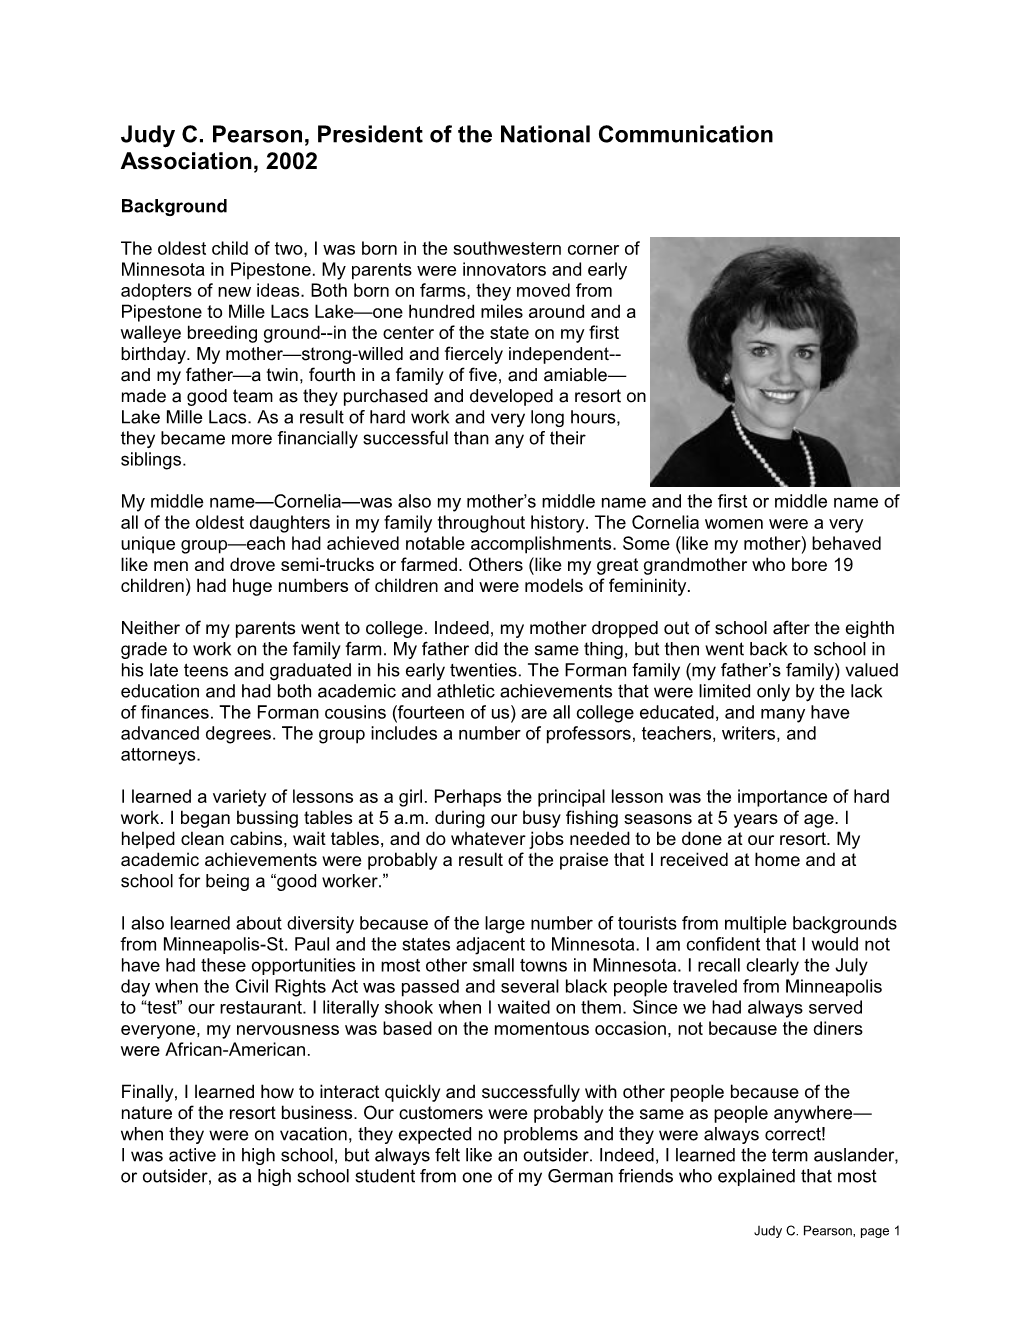 Judy C. Pearson, President of the National Communication Association, 2002